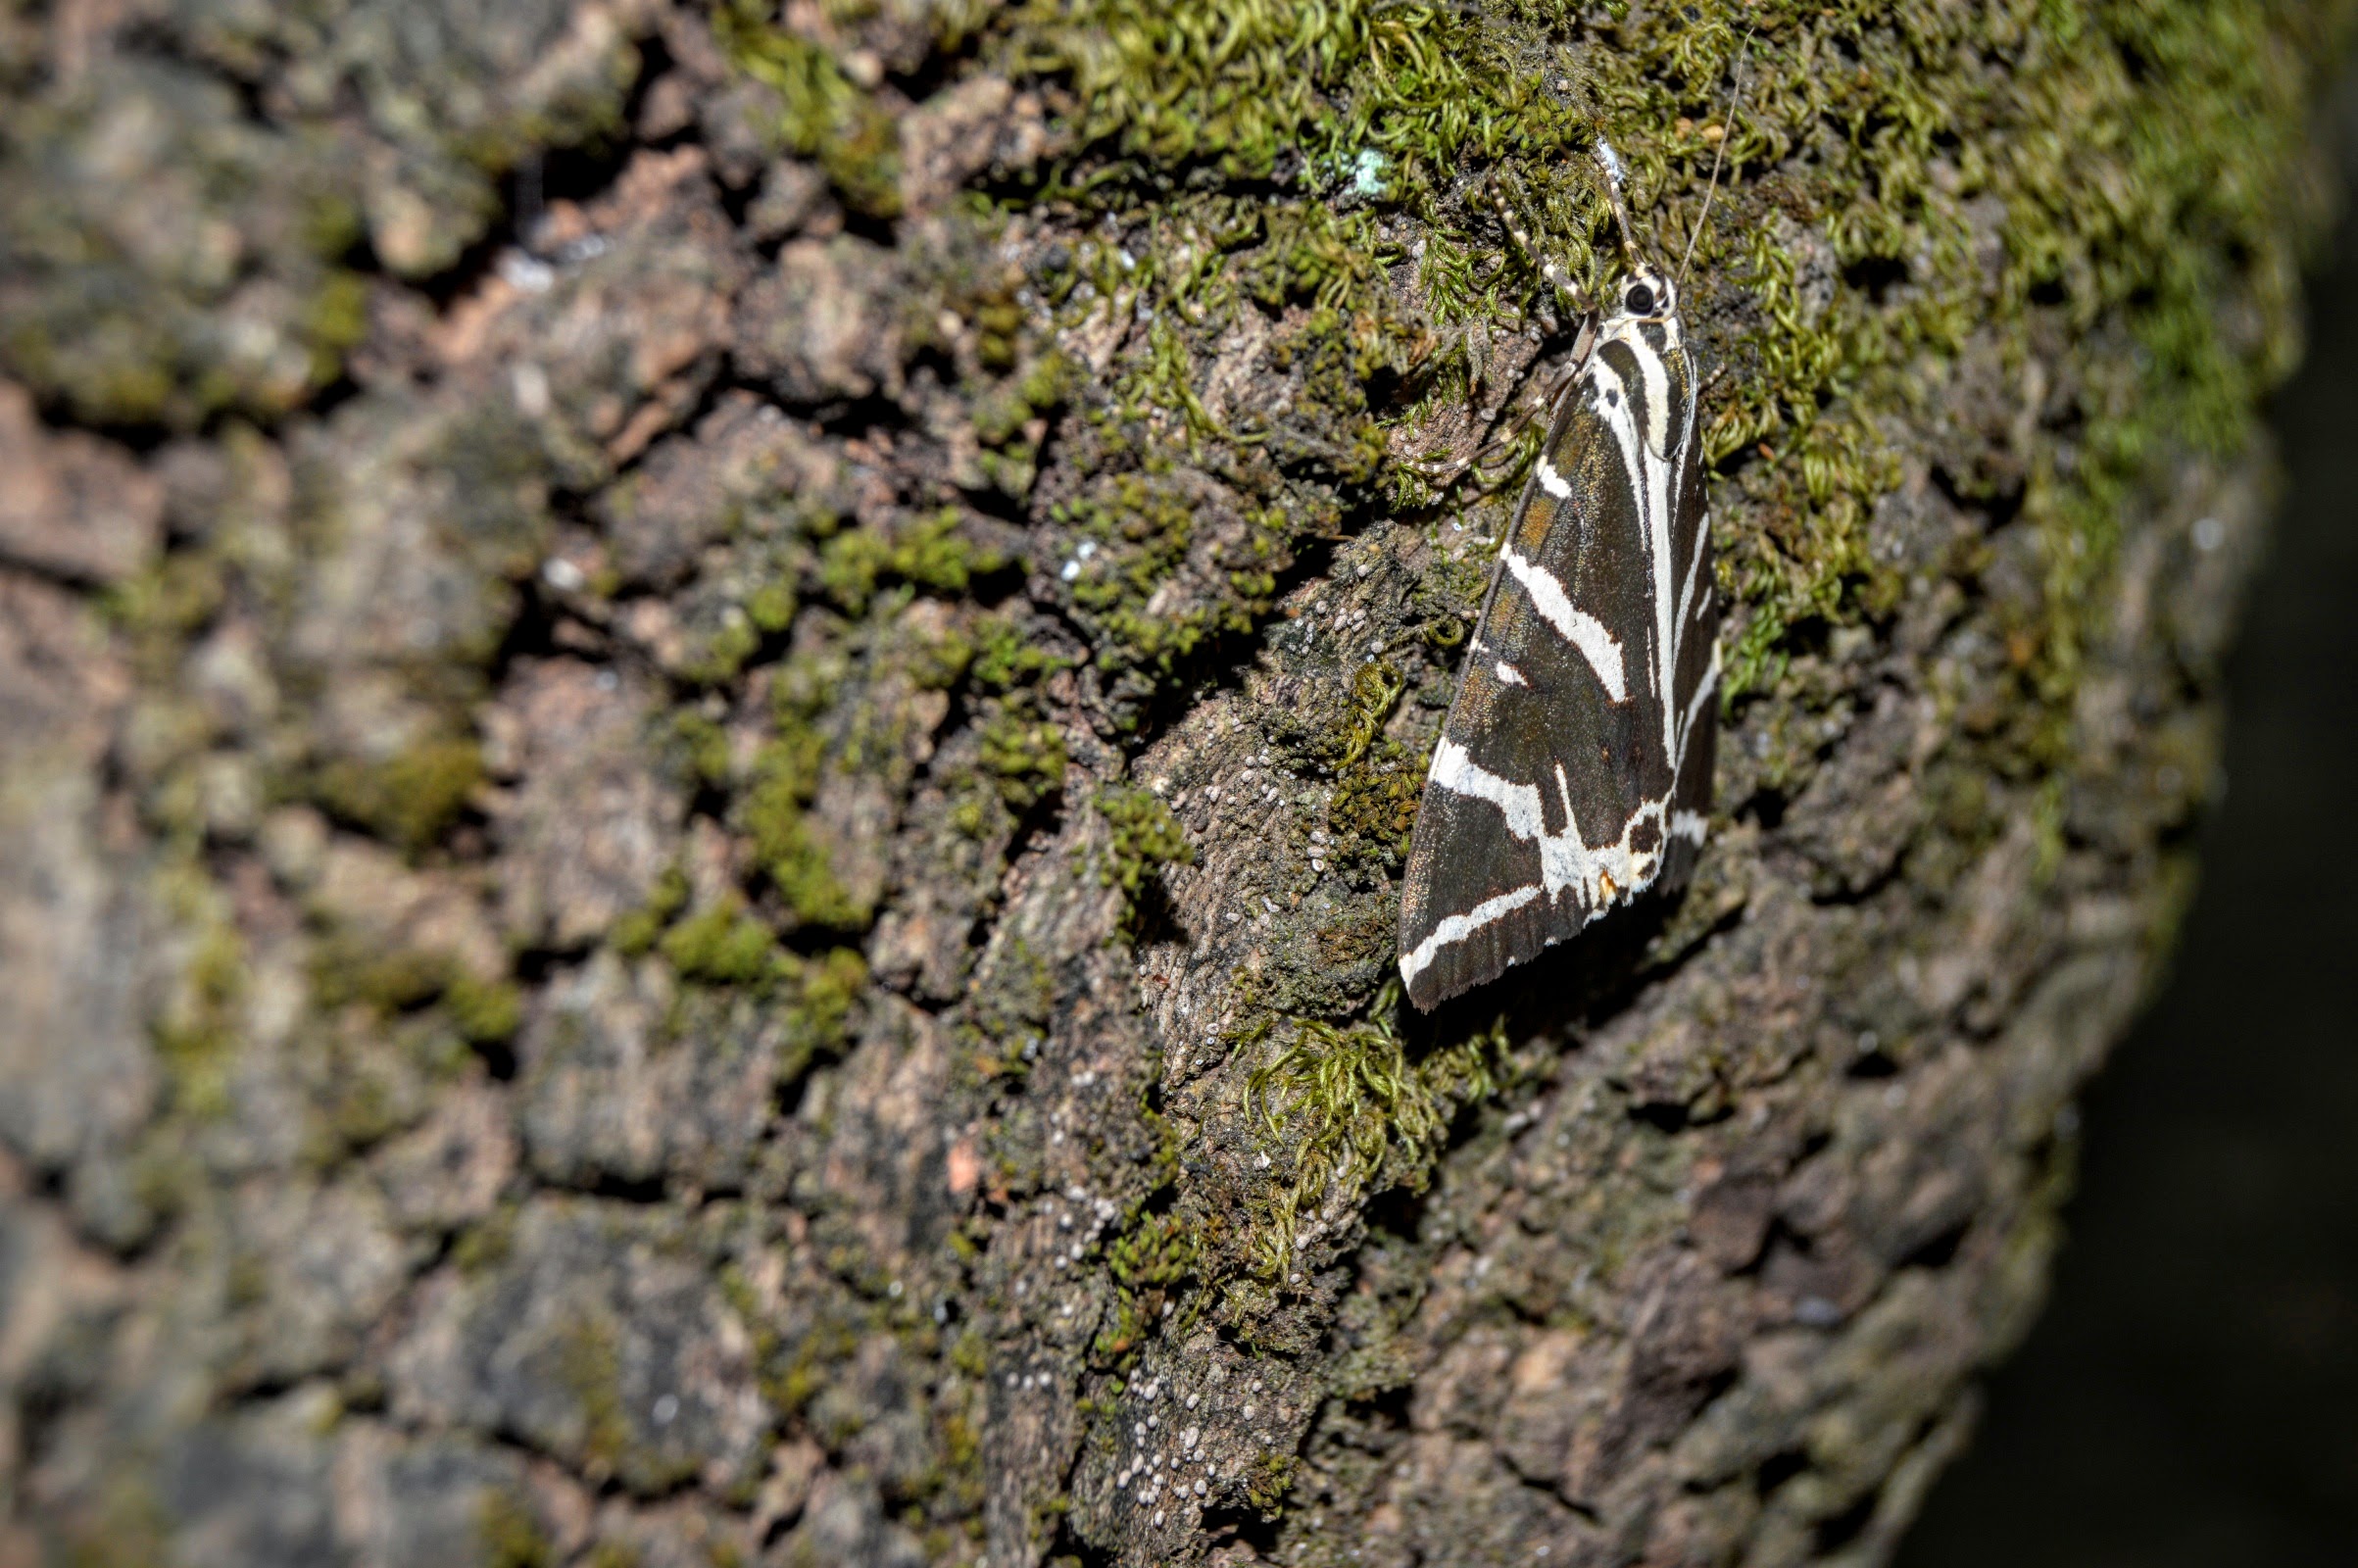 Striped brown and white butterfly photo